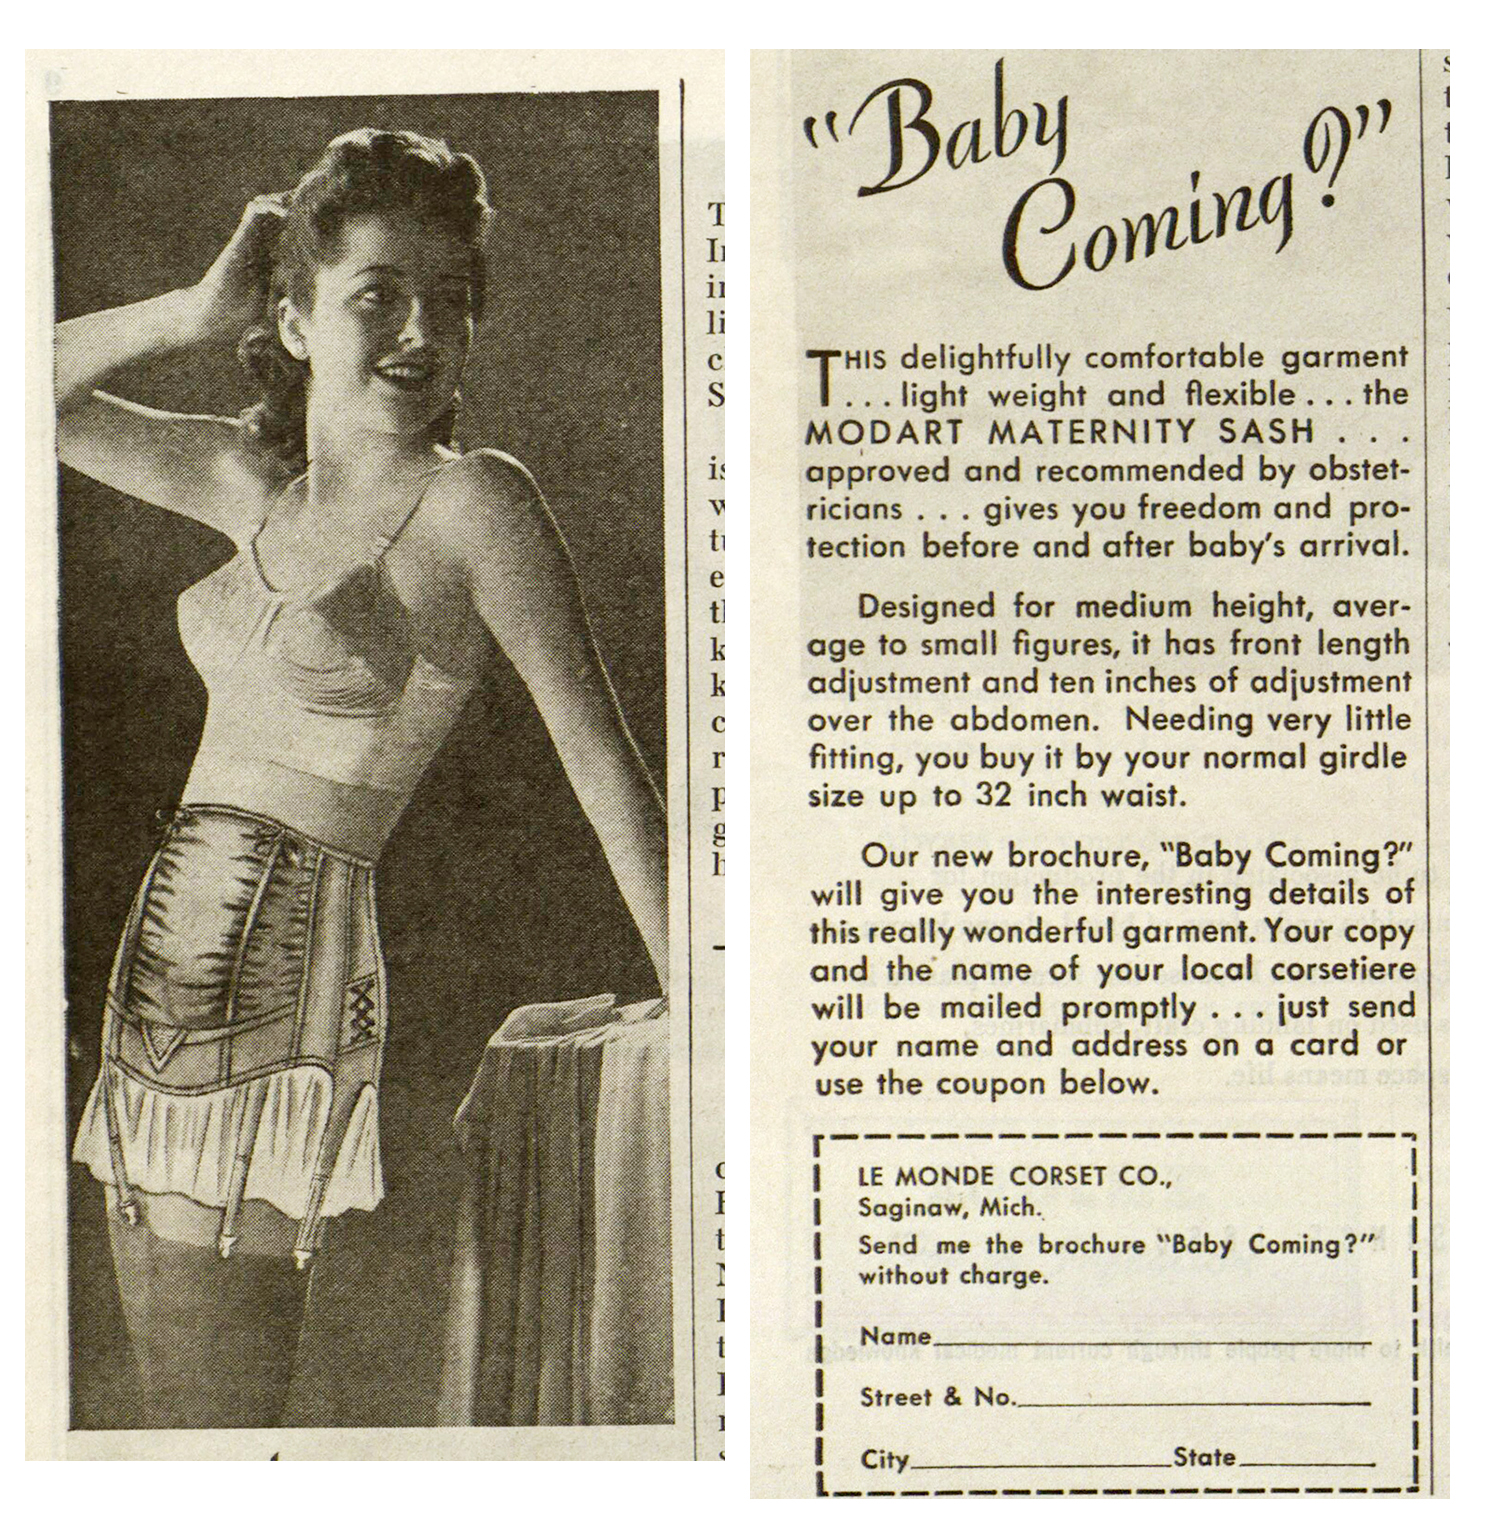 Young, pregnant white woman smiling and modeling maternity girdle and wearing bra, garters, and stockings